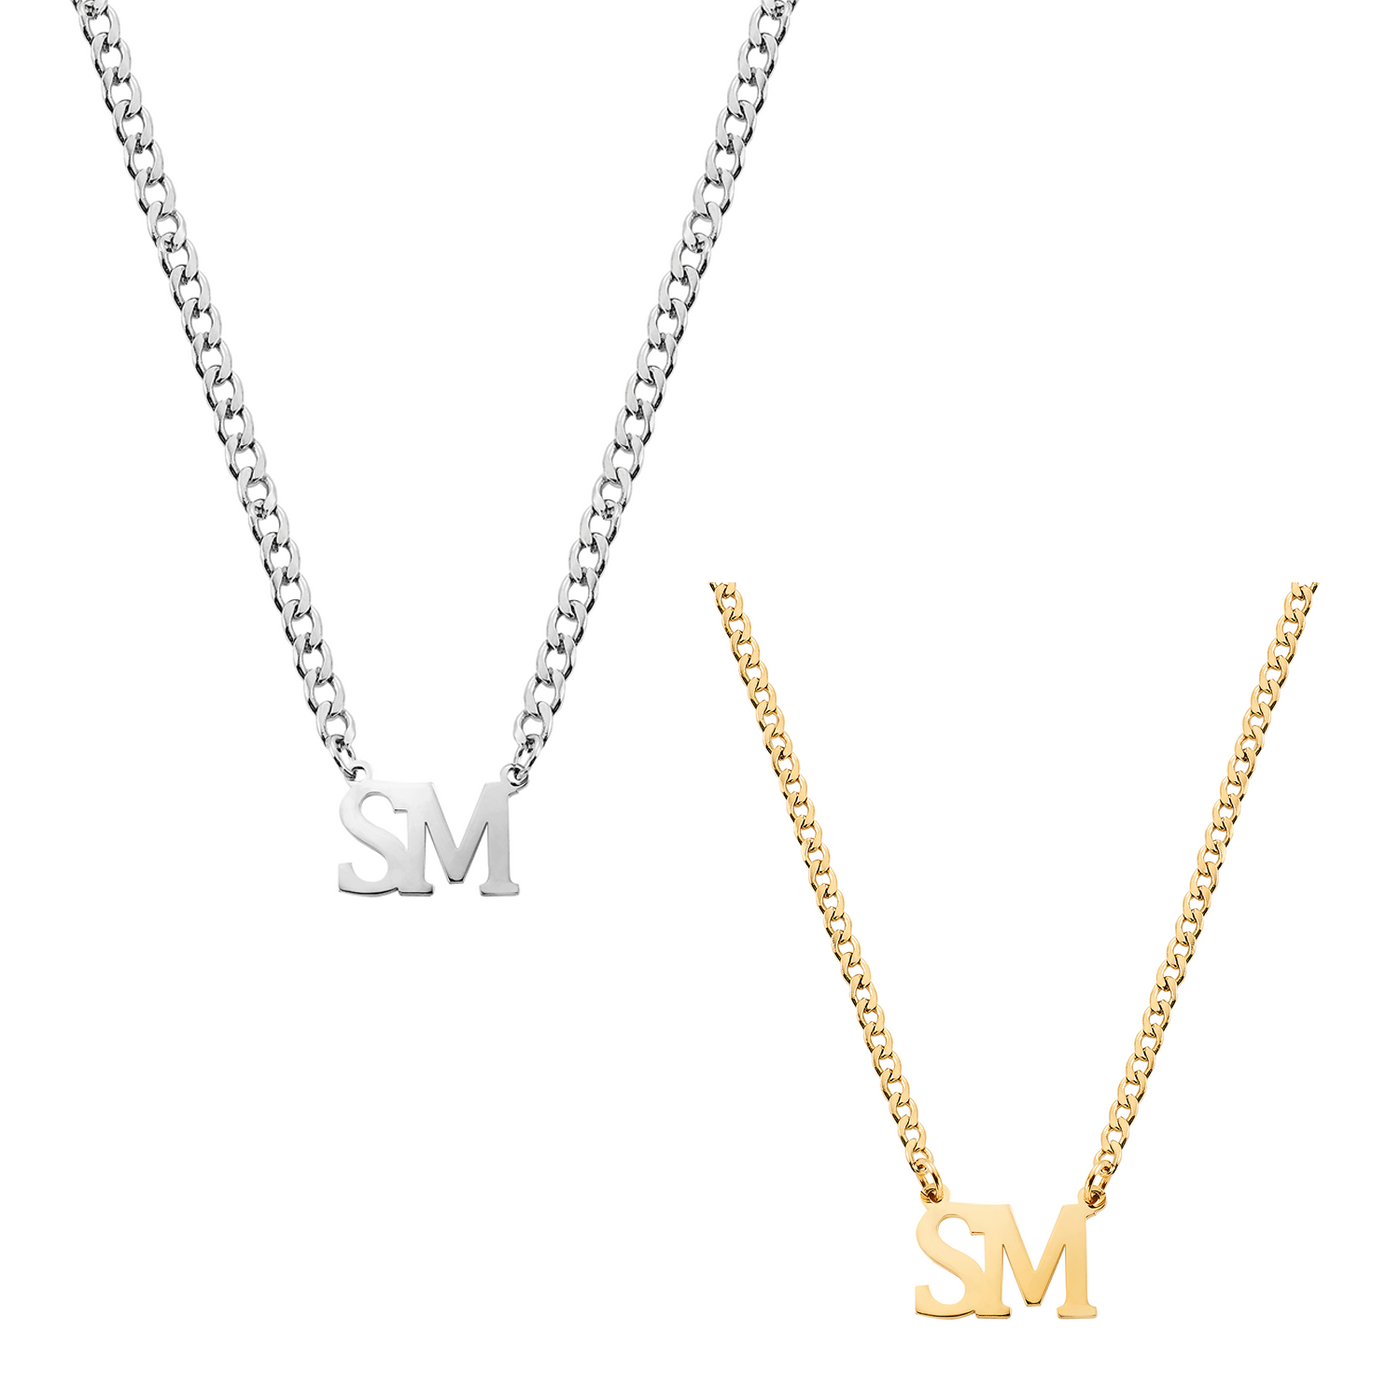 Couple Set Name Necklaces with Letters